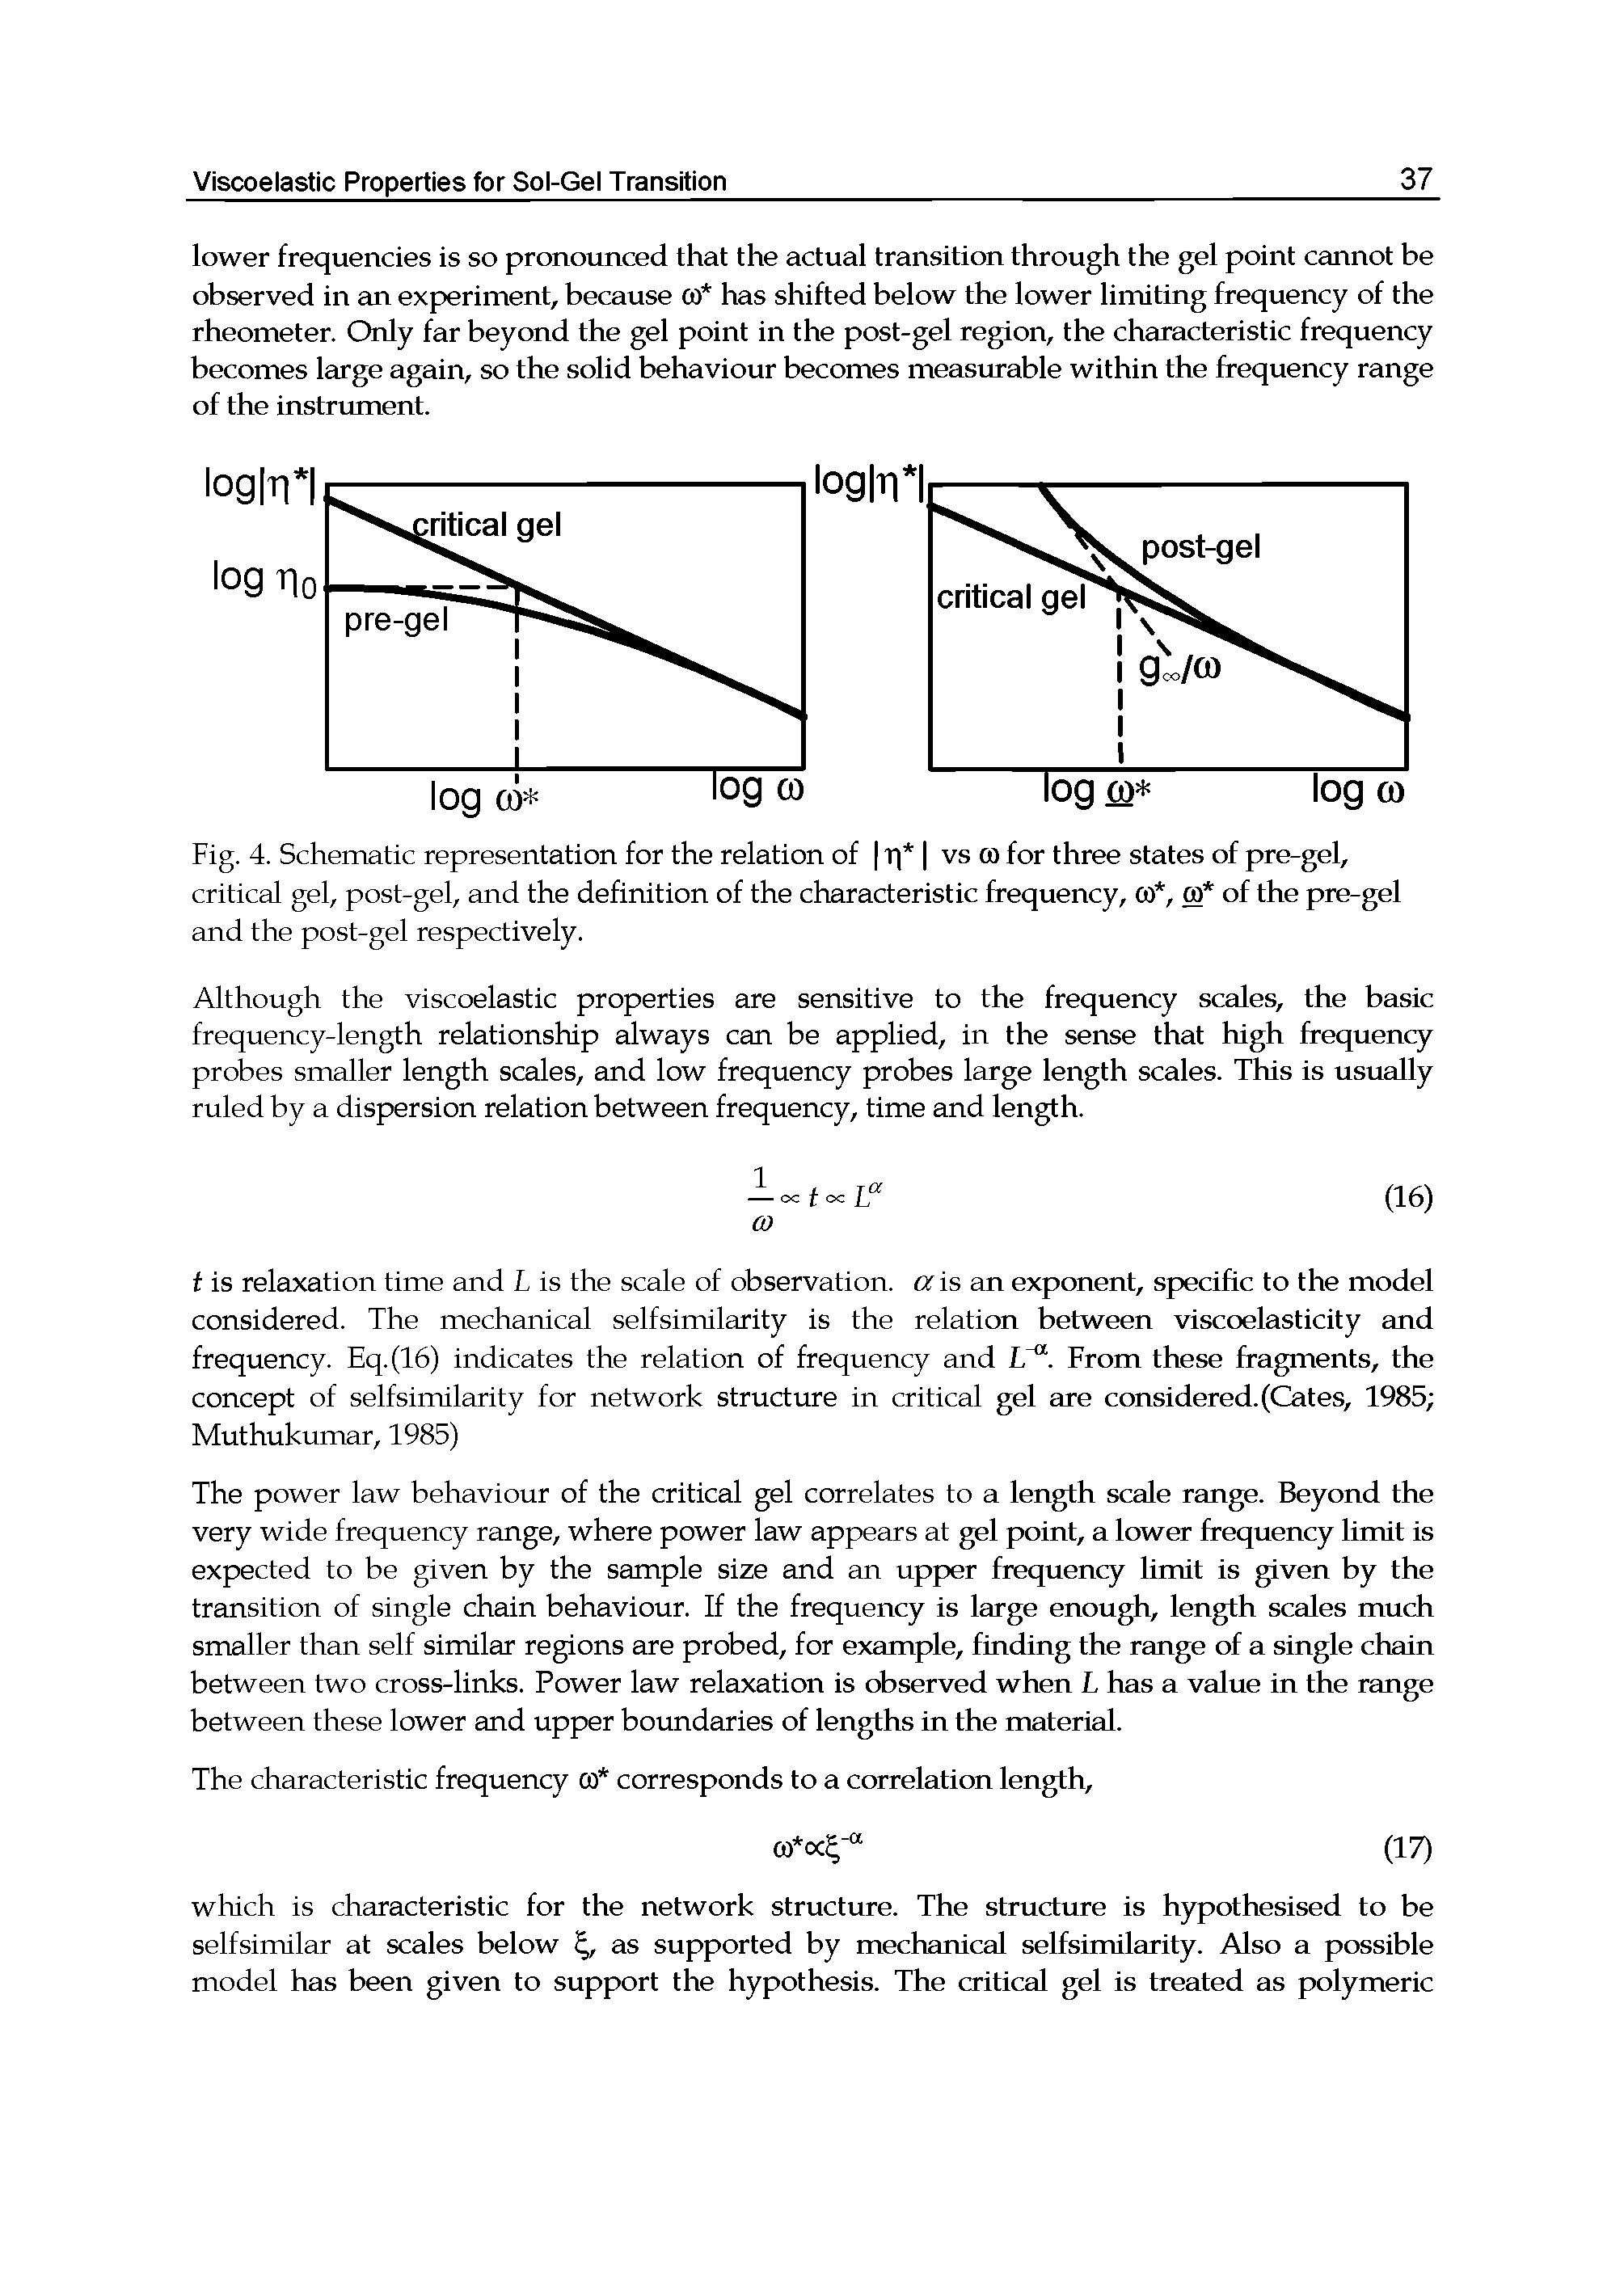 Fig. 4. Schematic representation for the relation of T vs (O for three states of pre-gel, critical gel, post-gel, and the definition of the characteristic frequency, of, eo of the pre-gel and the post-gel respectively.